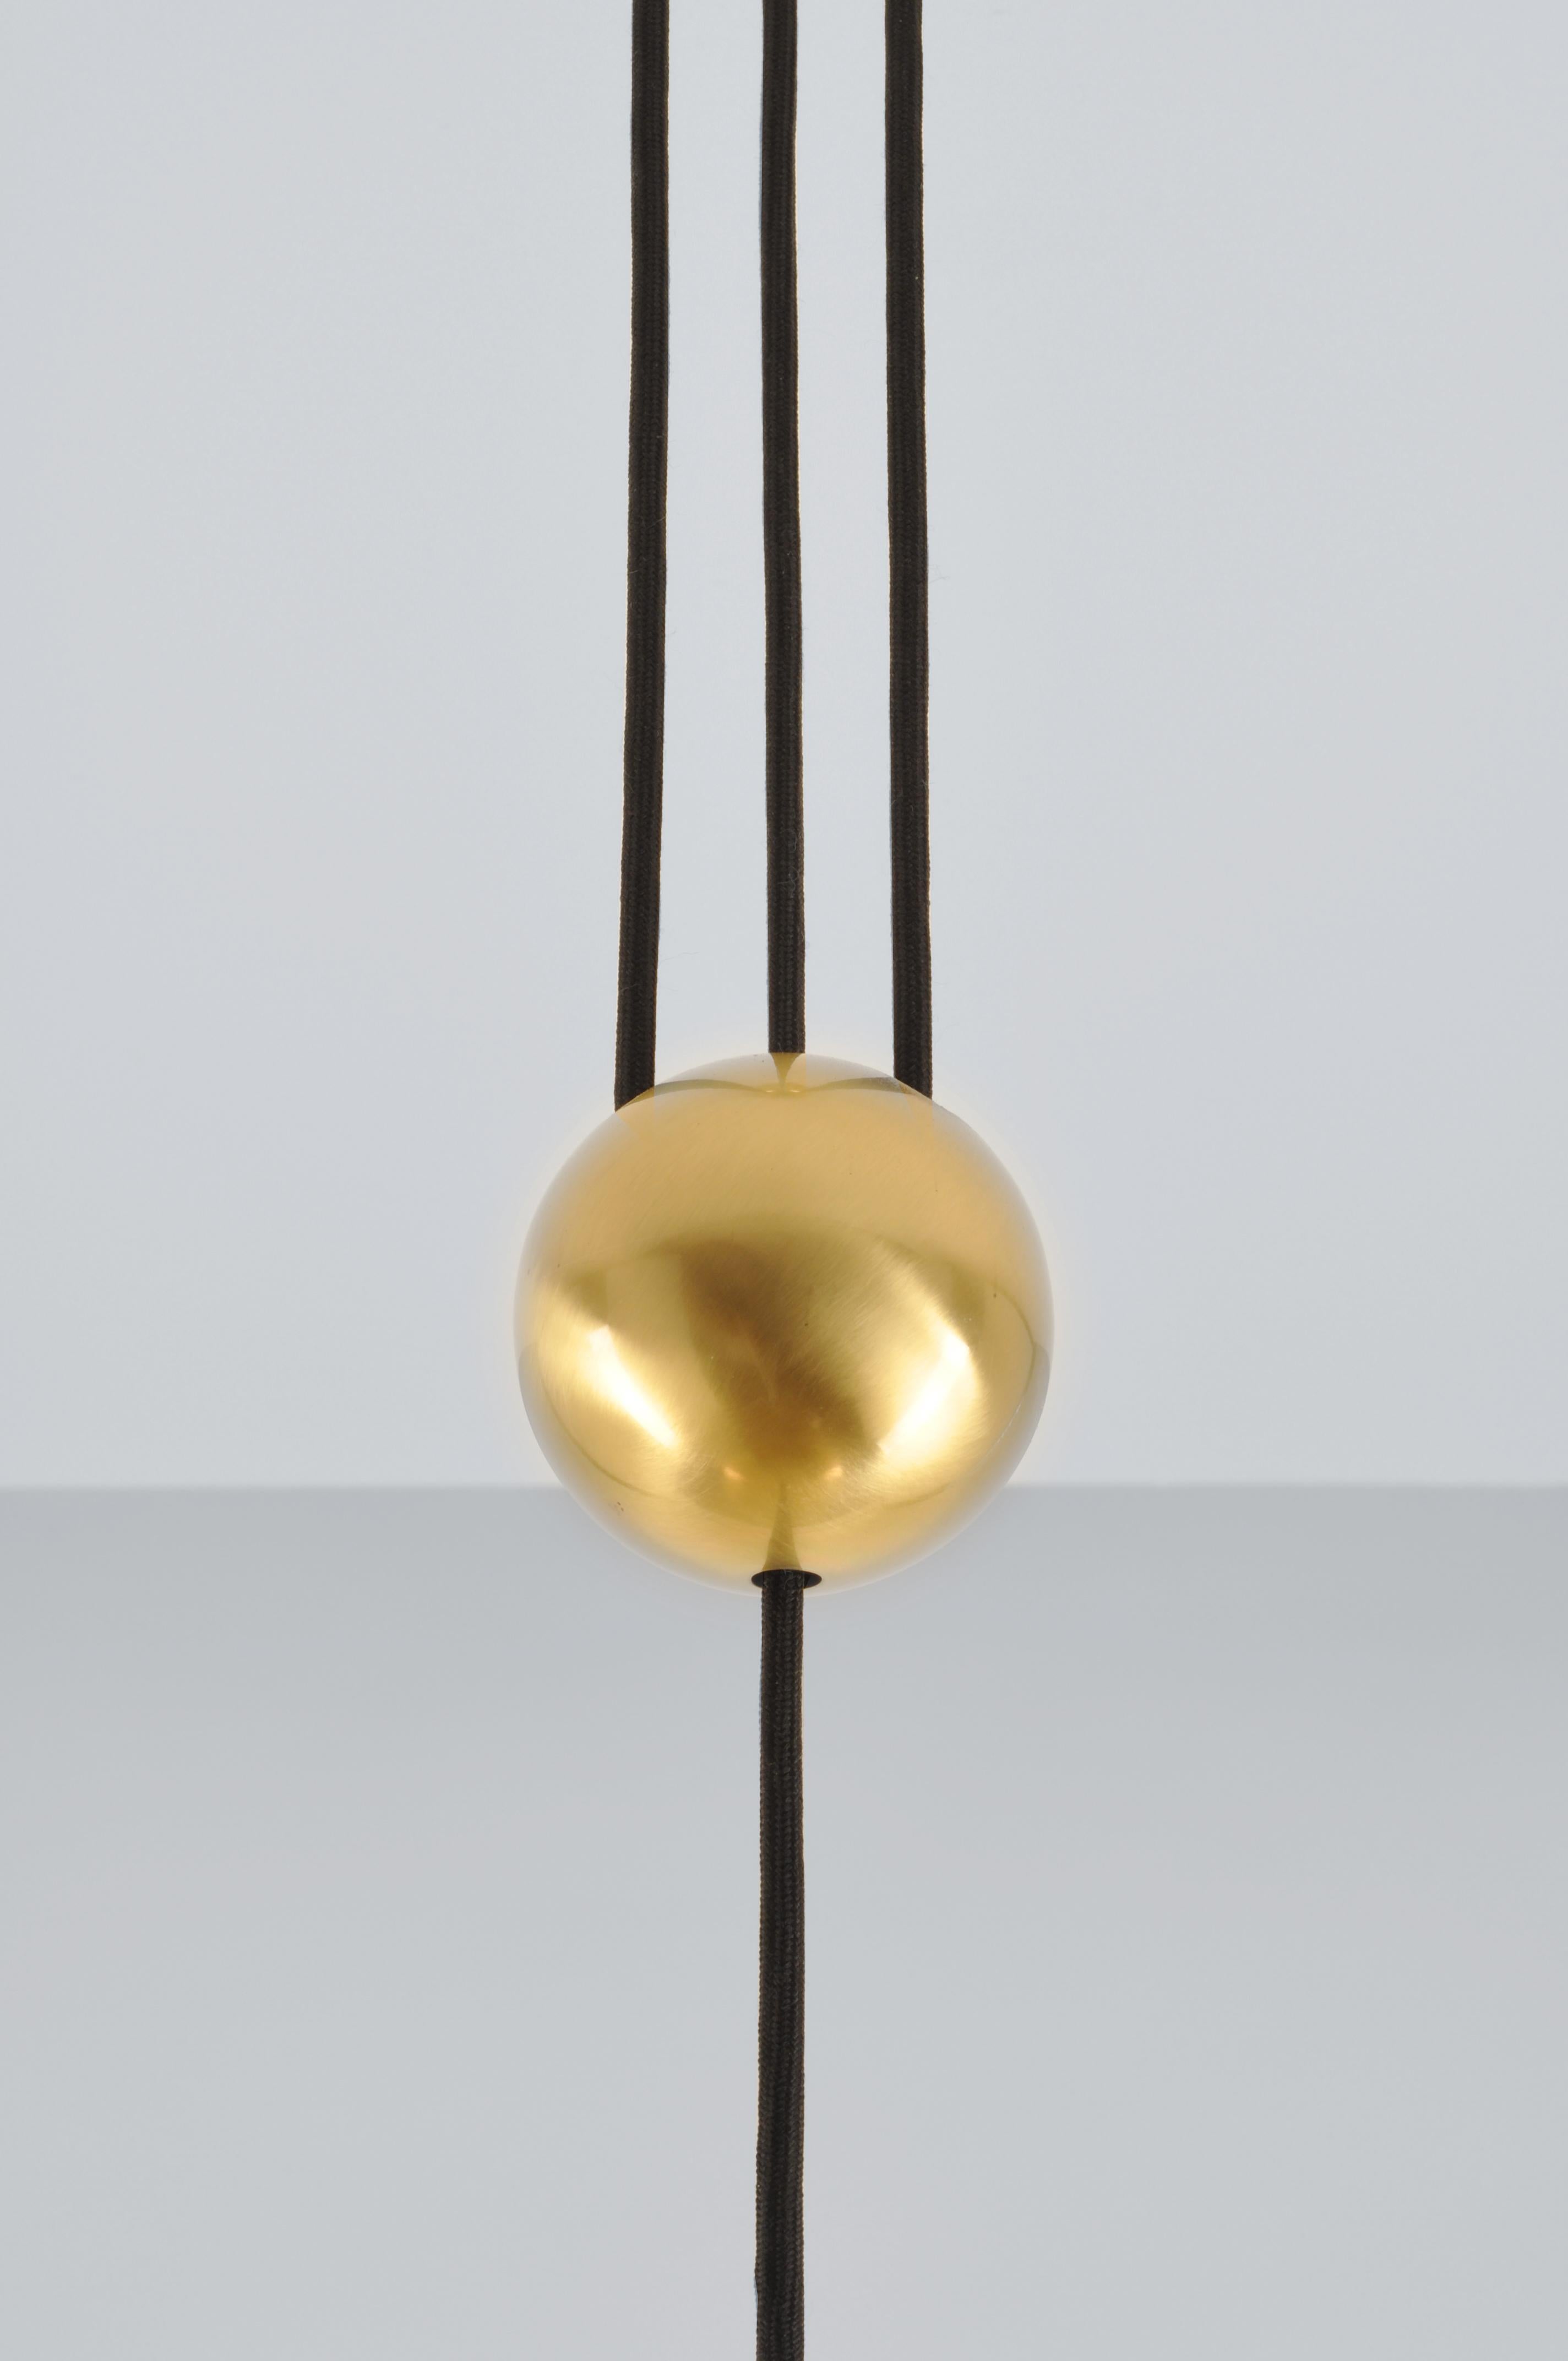 Mid-Century Modern Florian Schulz Duos 36 Counterbalance Pendant Lamp in Polished Brass or nickel For Sale